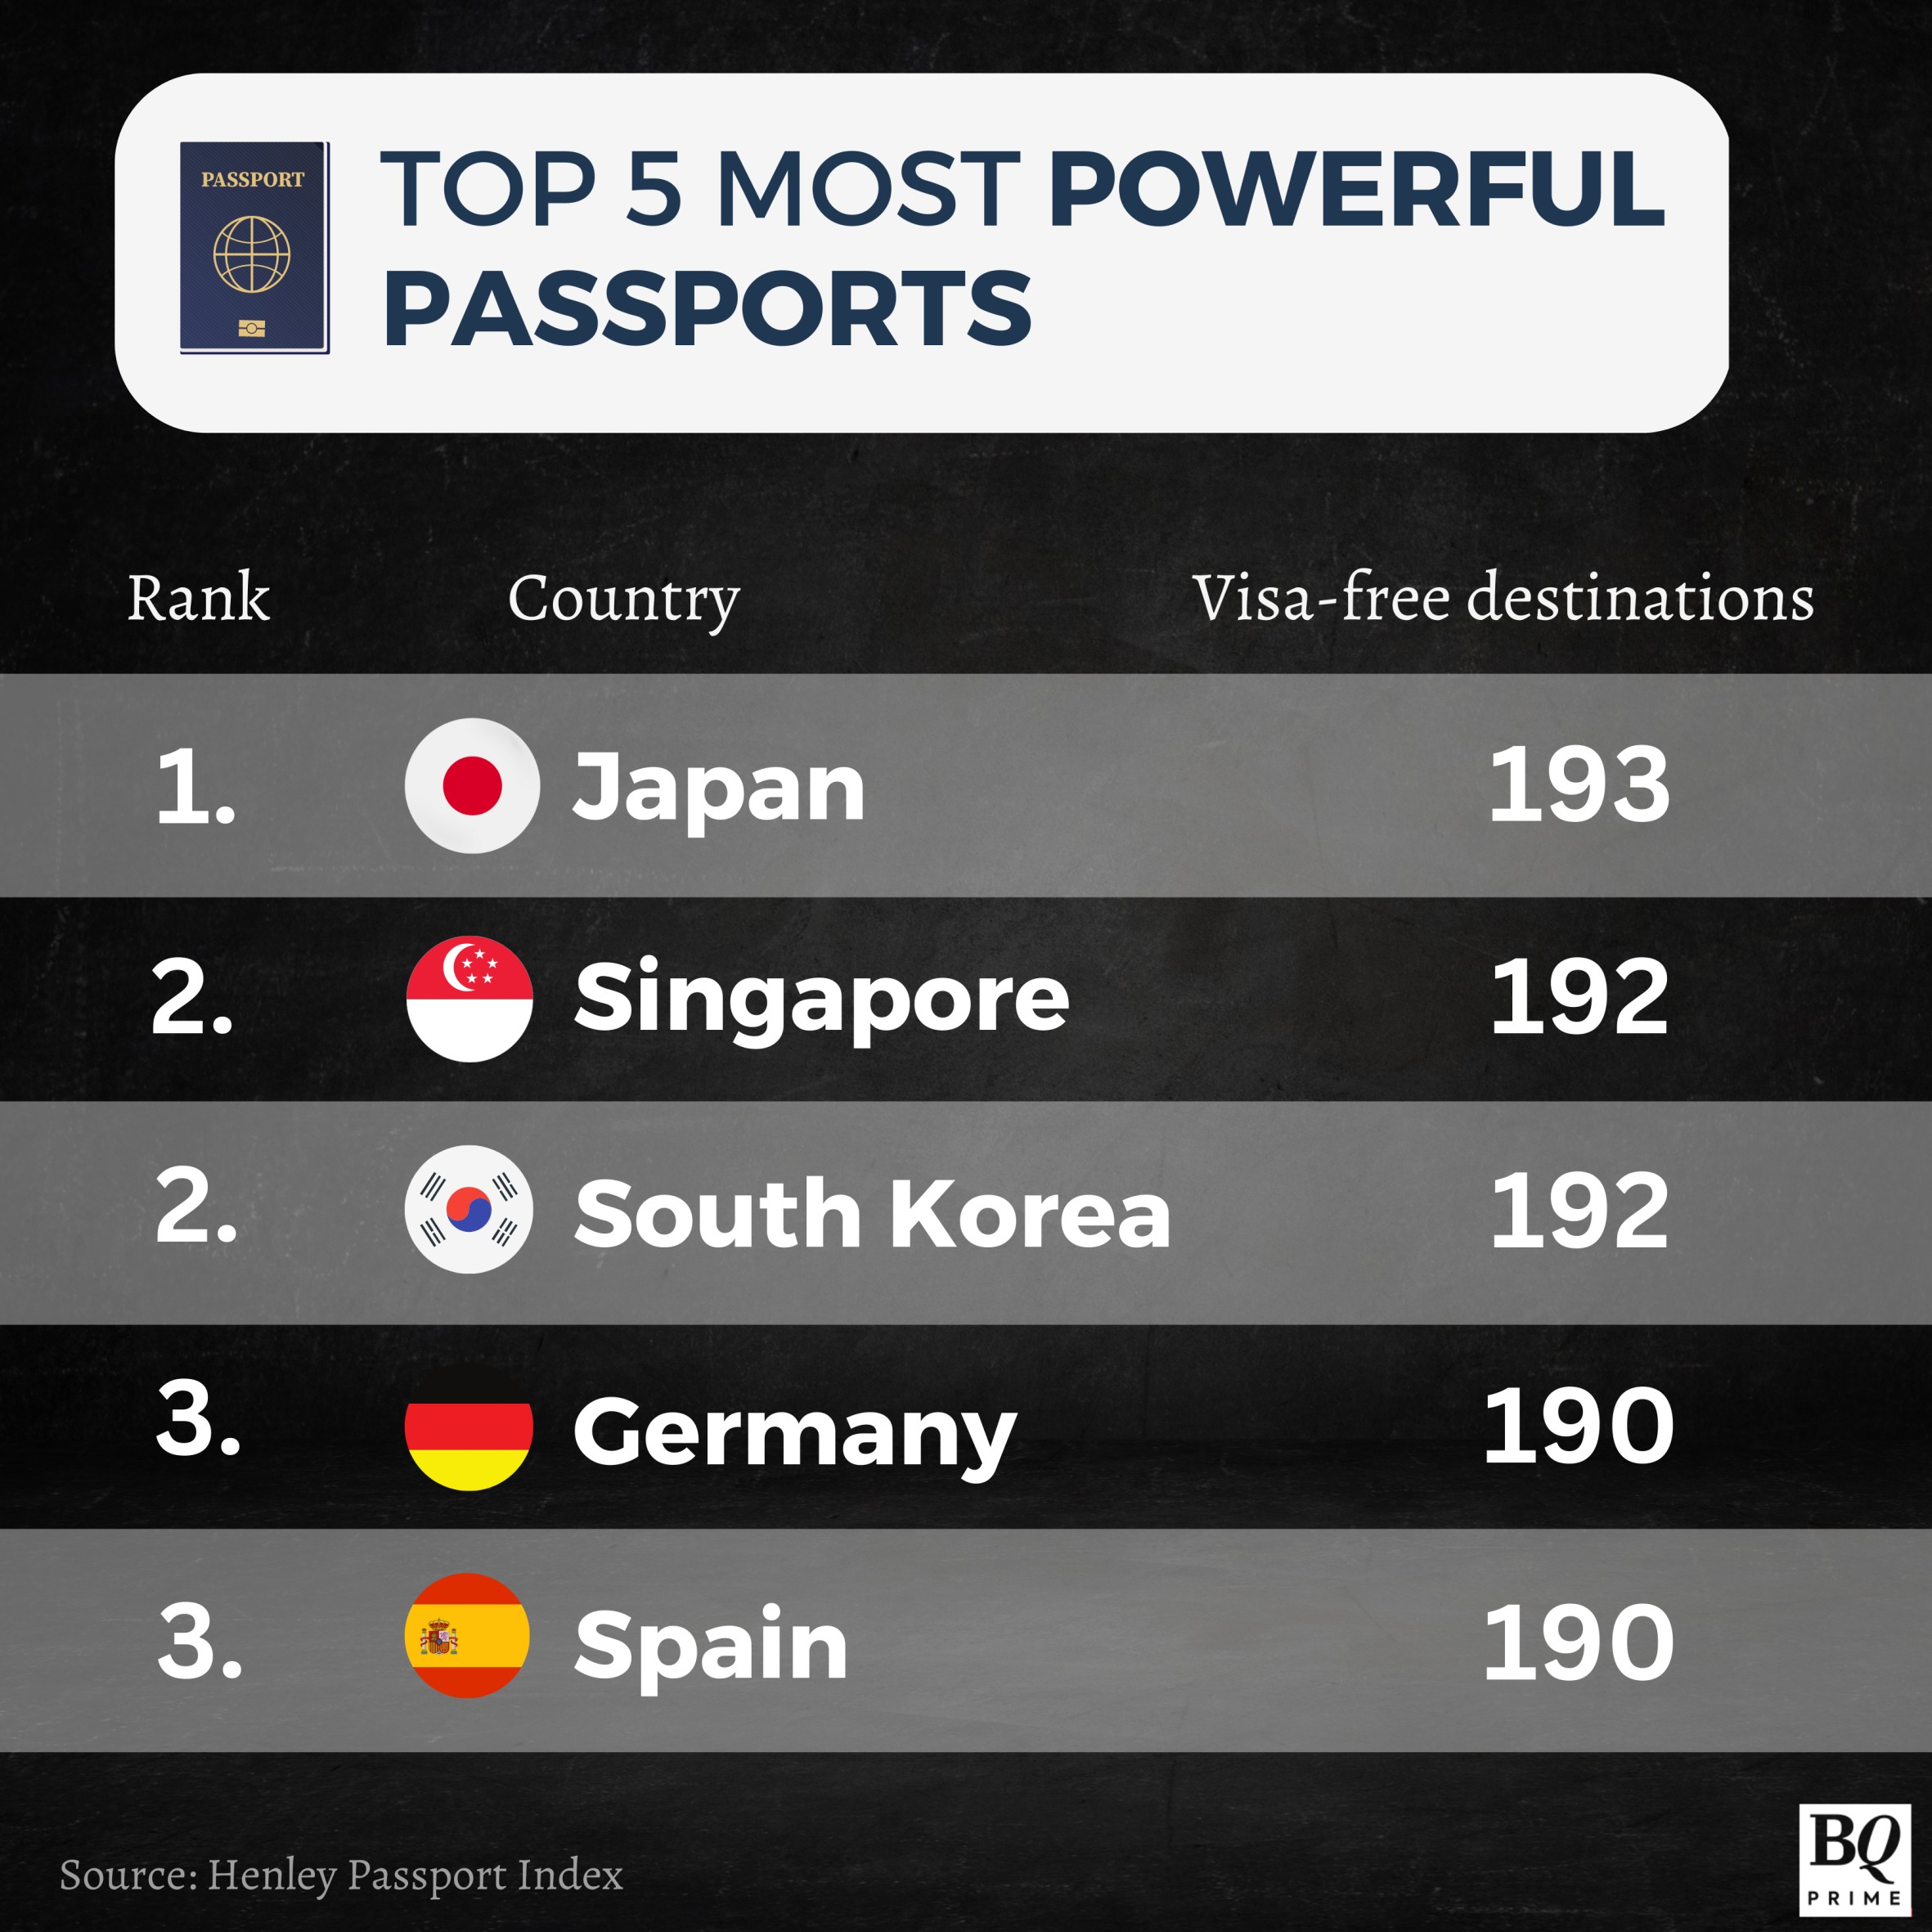 World's strongest passports: Japan number 1, Iran number 98 out of 106